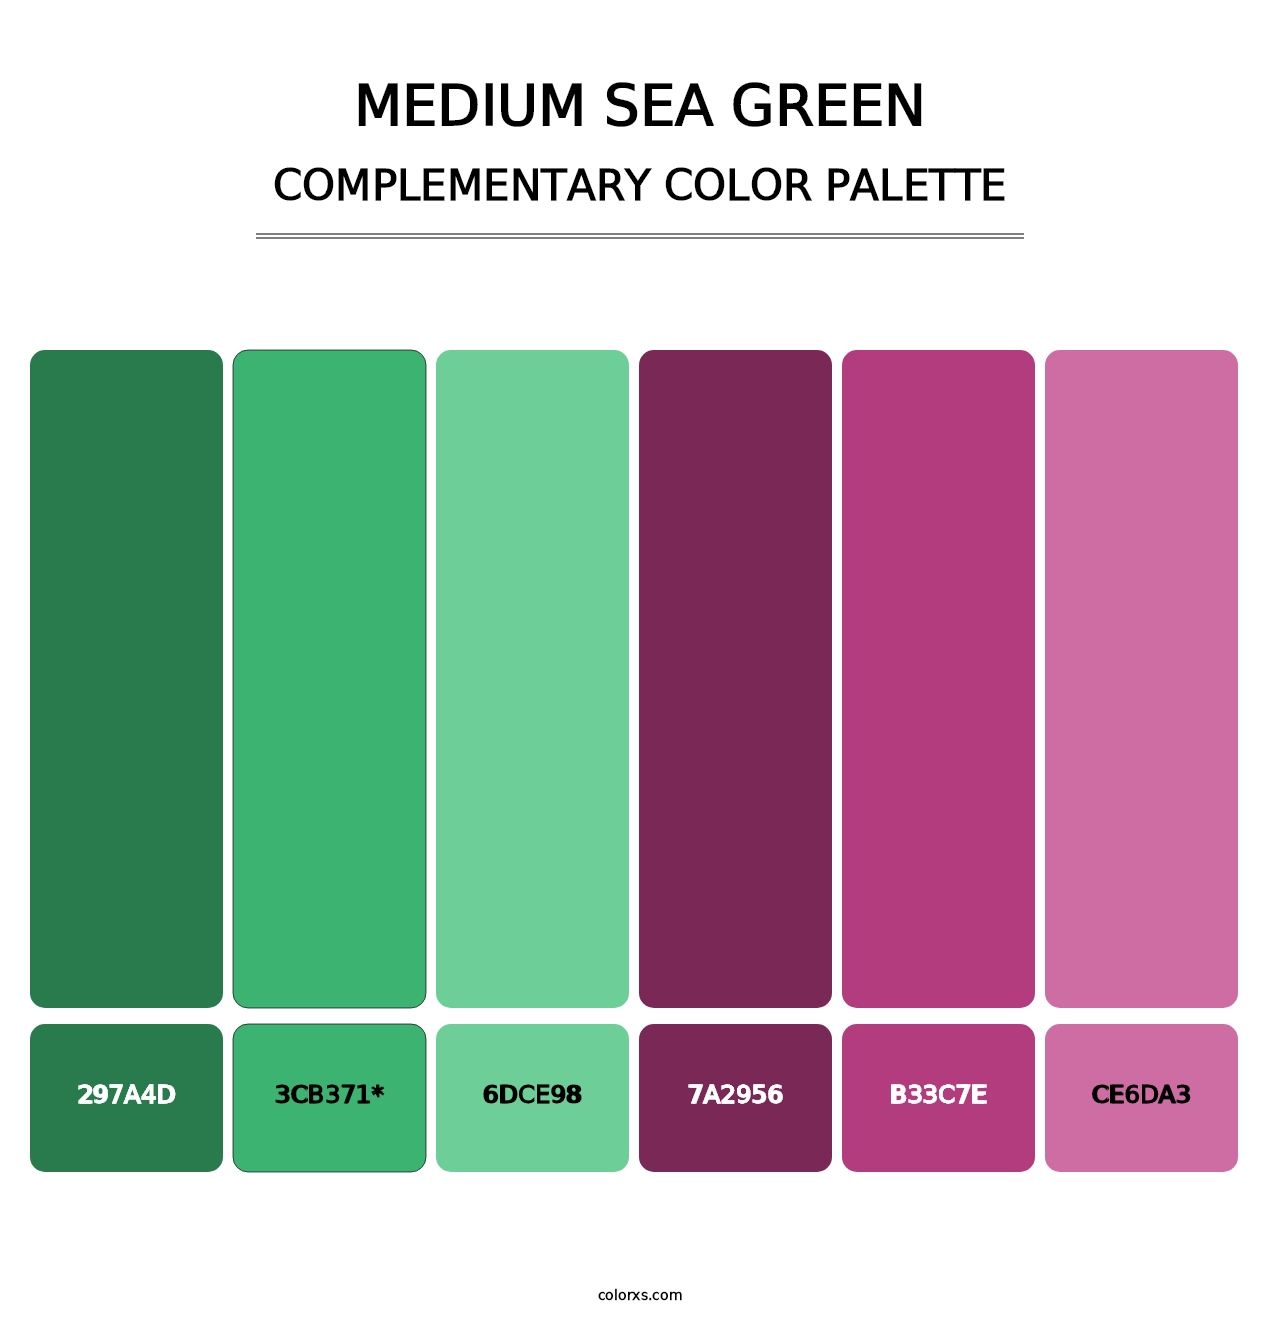 Medium Sea Green - Complementary Color Palette